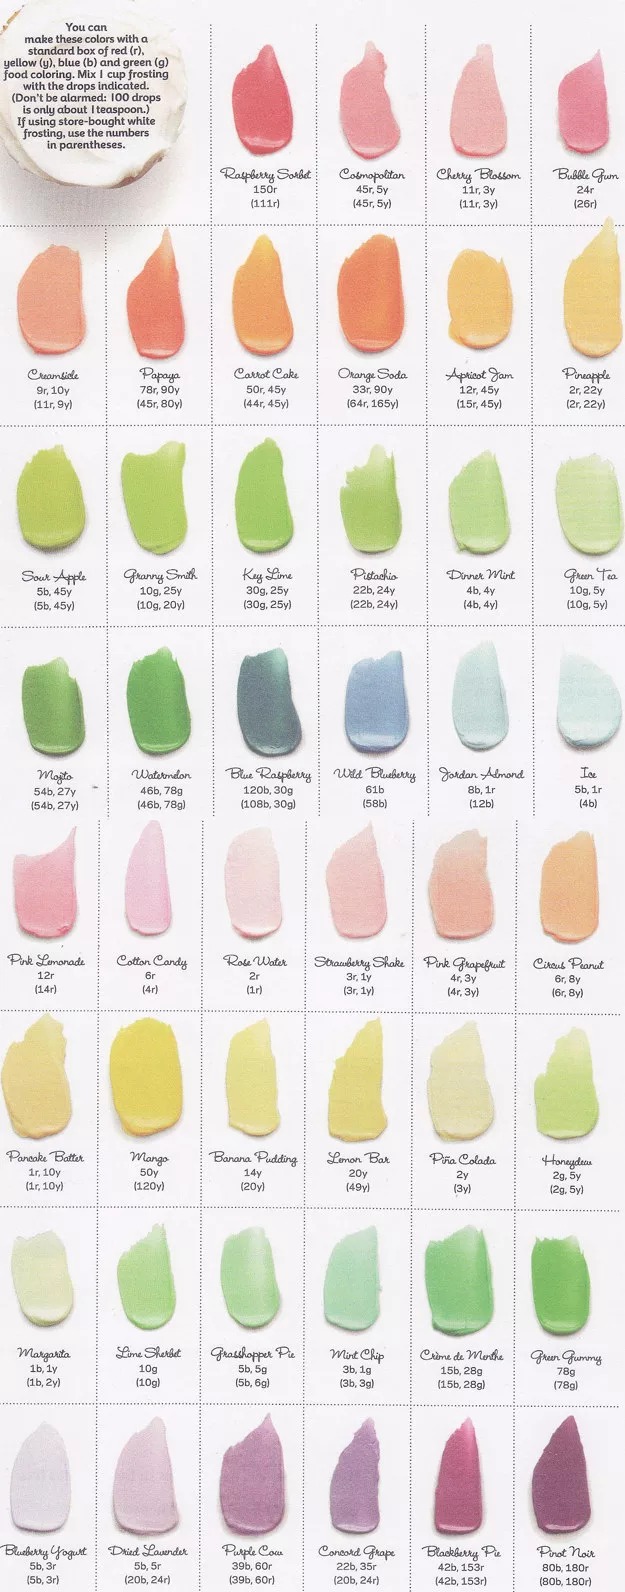 Frost by Numbers: How to Make Frosting Colors